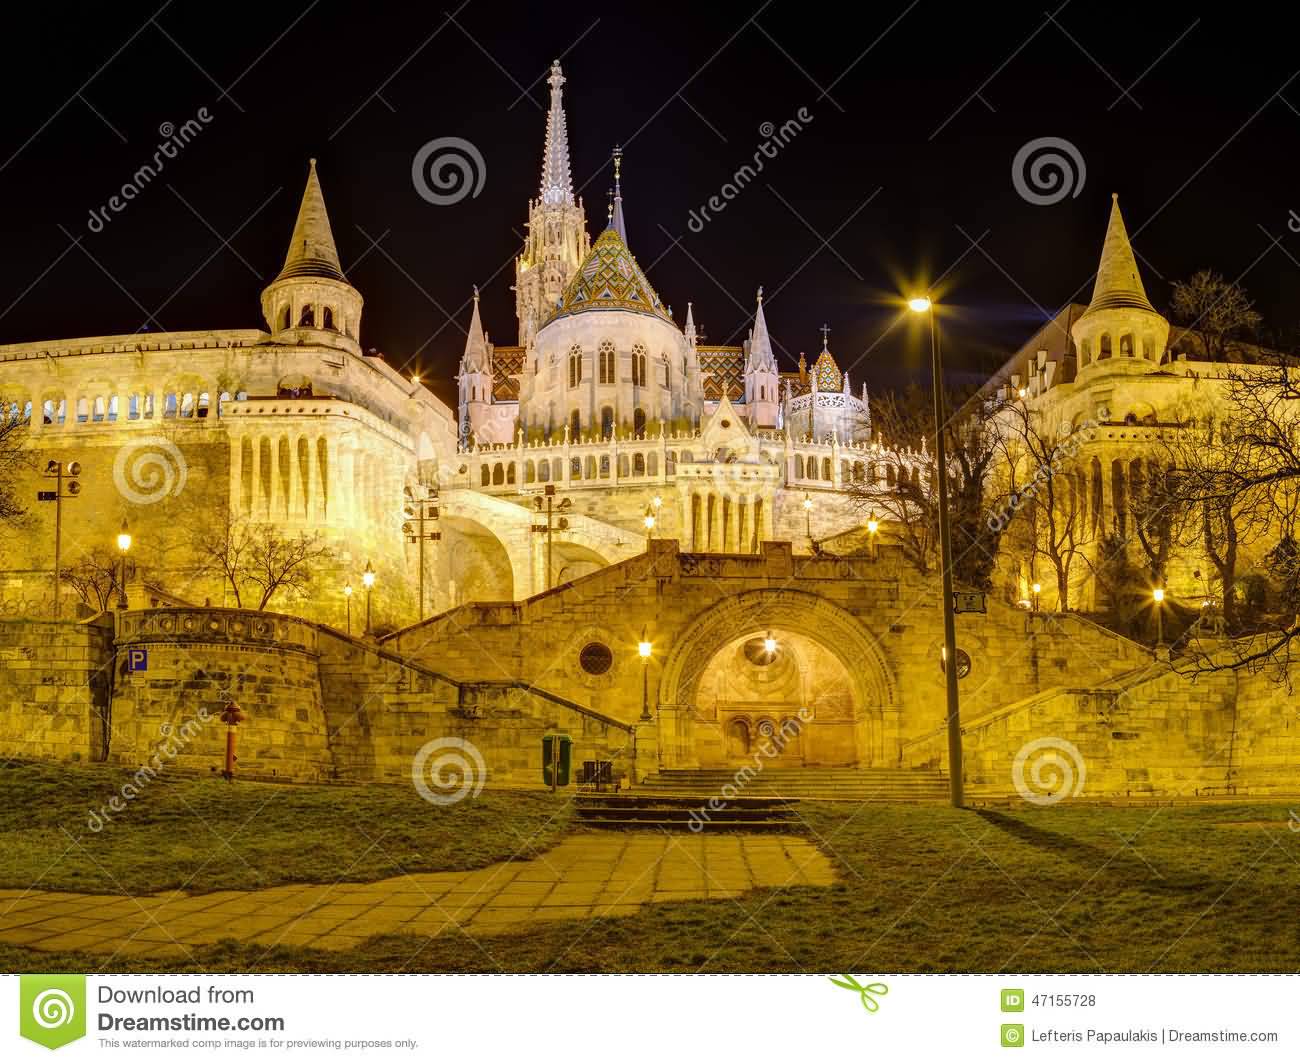 Fisherman's Bastion And Matthias Church Night View In Budapest